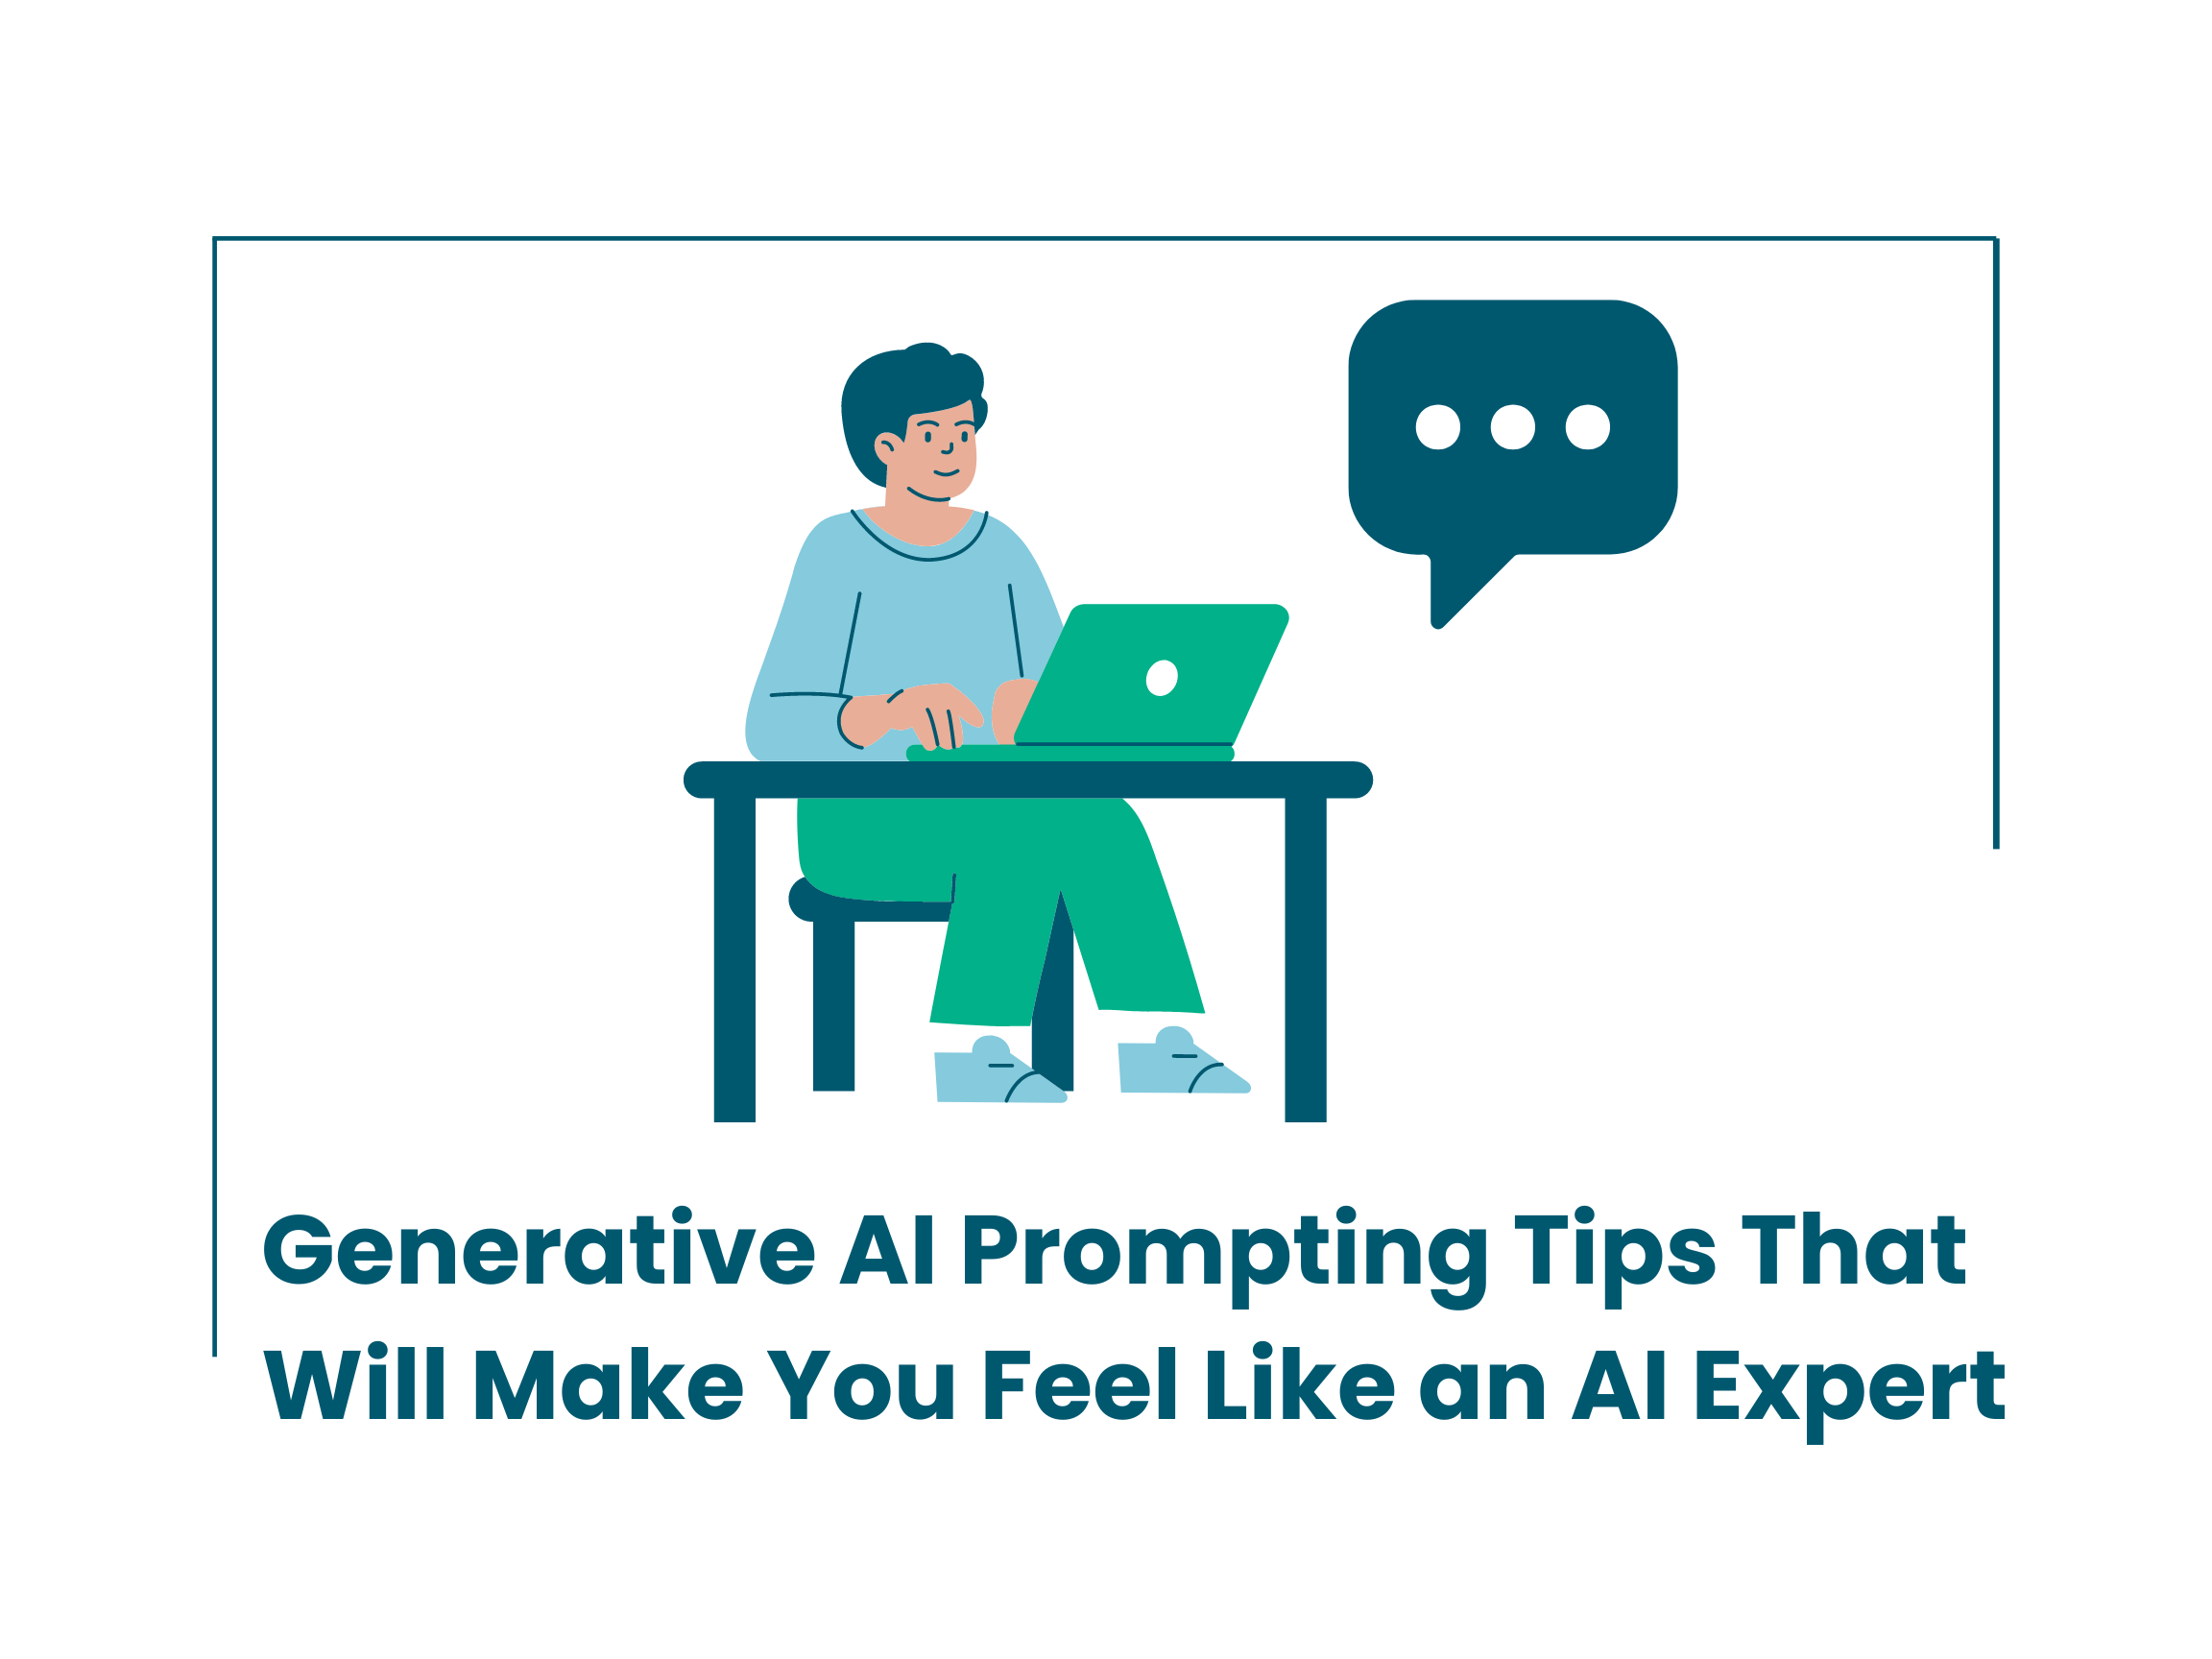 Generative AI Prompting Tips That Will Make You Feel Like an AI Expert